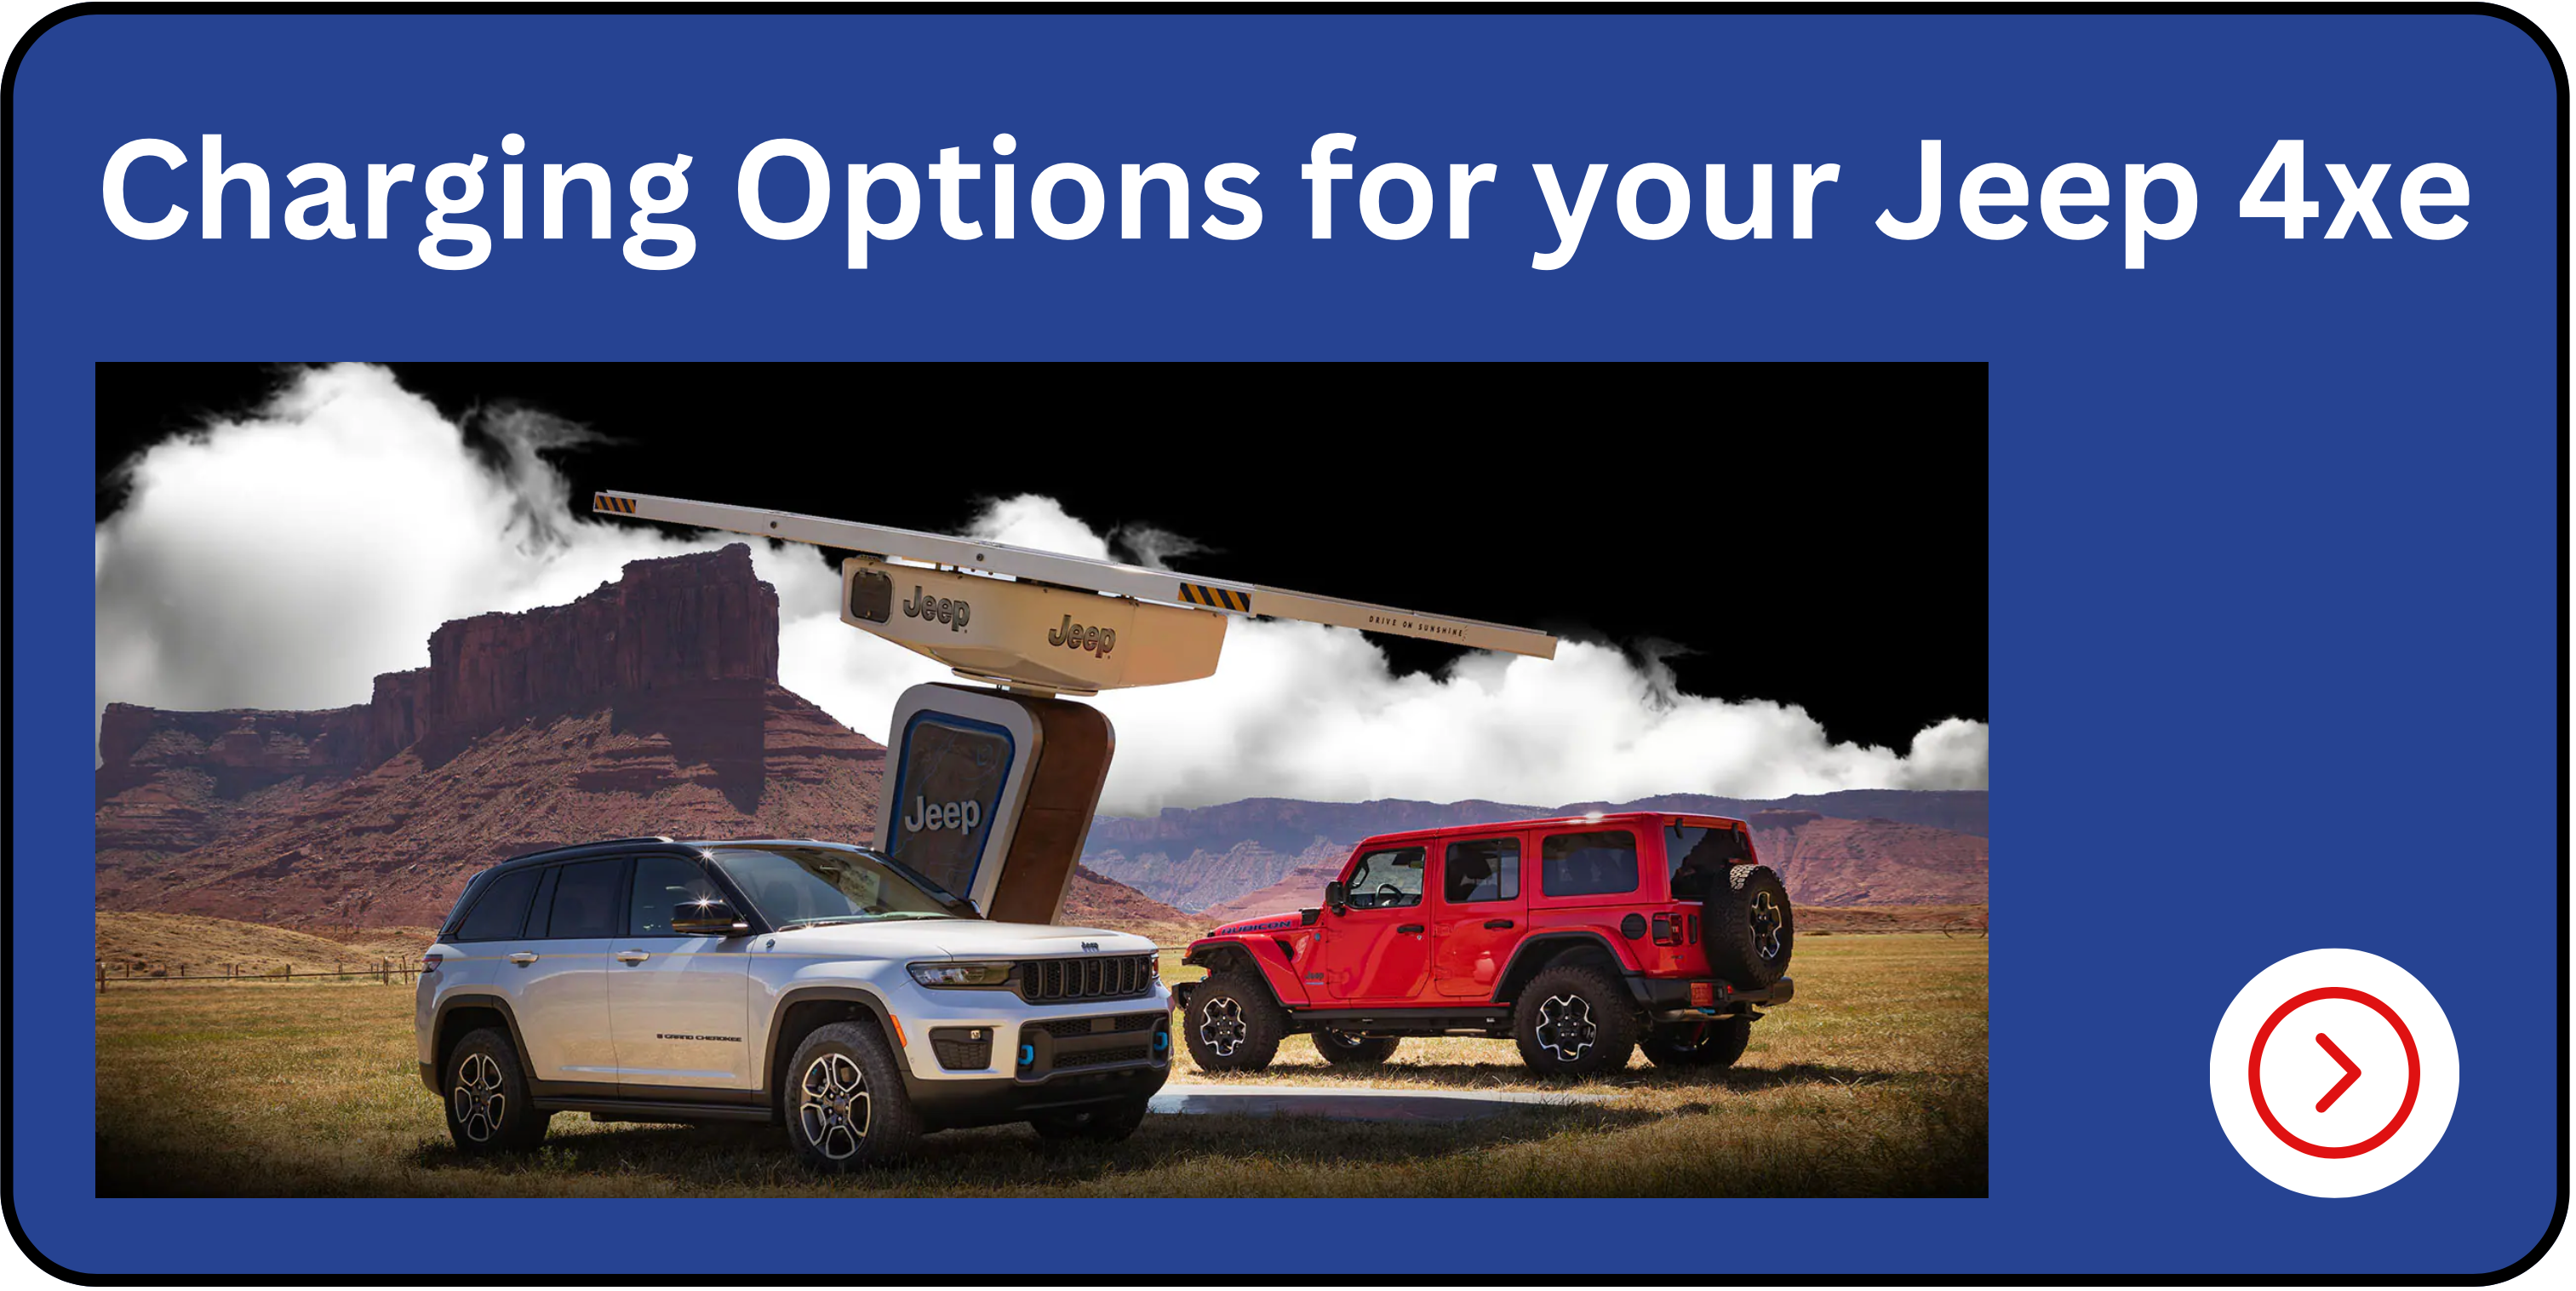 Charging Options for your Jeep 4xe